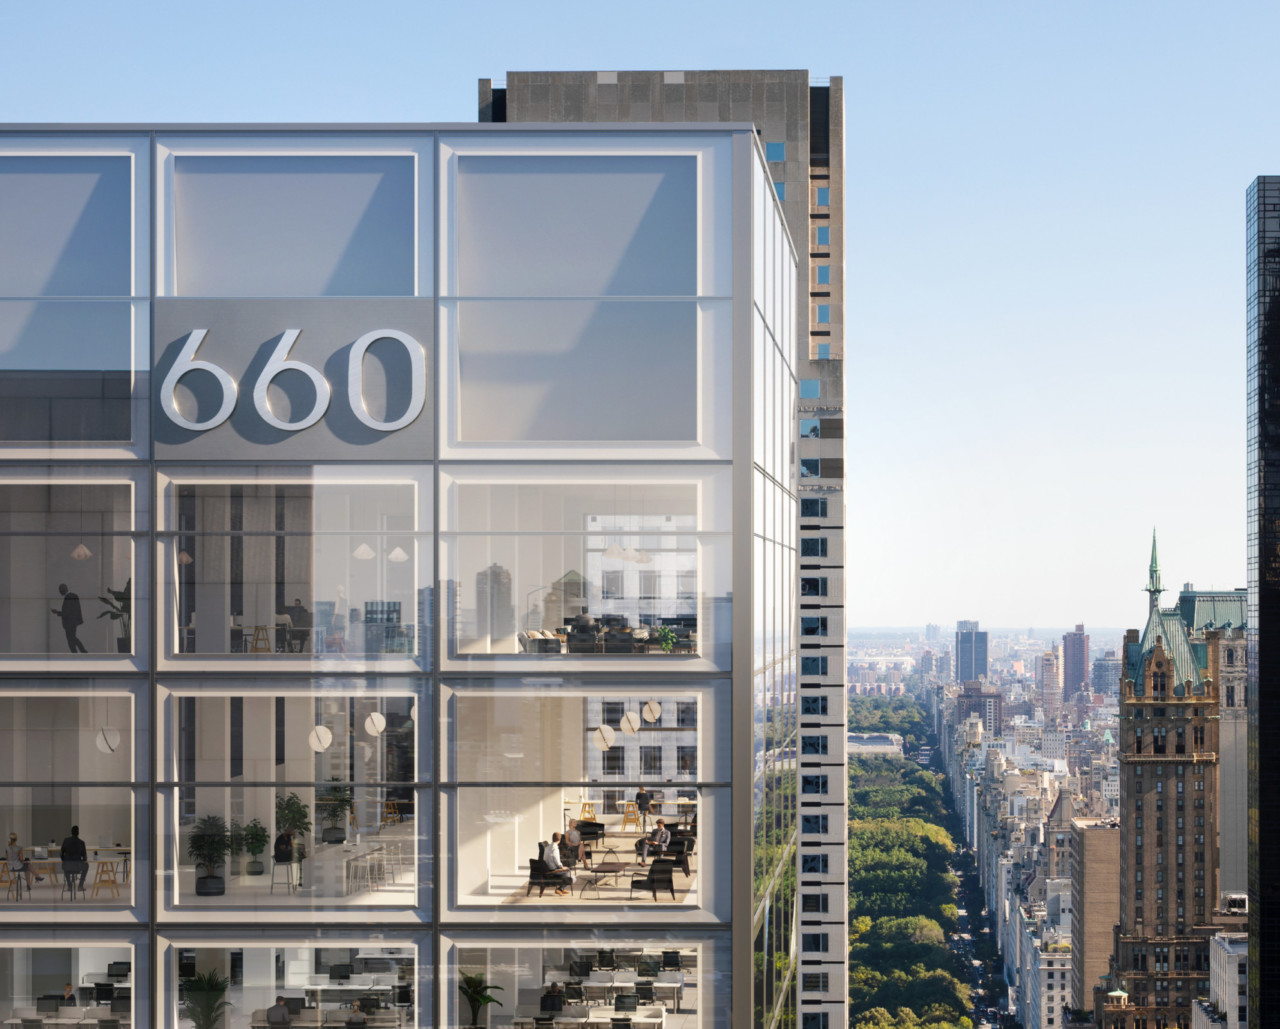 rendering of a high-rise office tower in manhattan with large glass windows, 660 Fifth Avenue